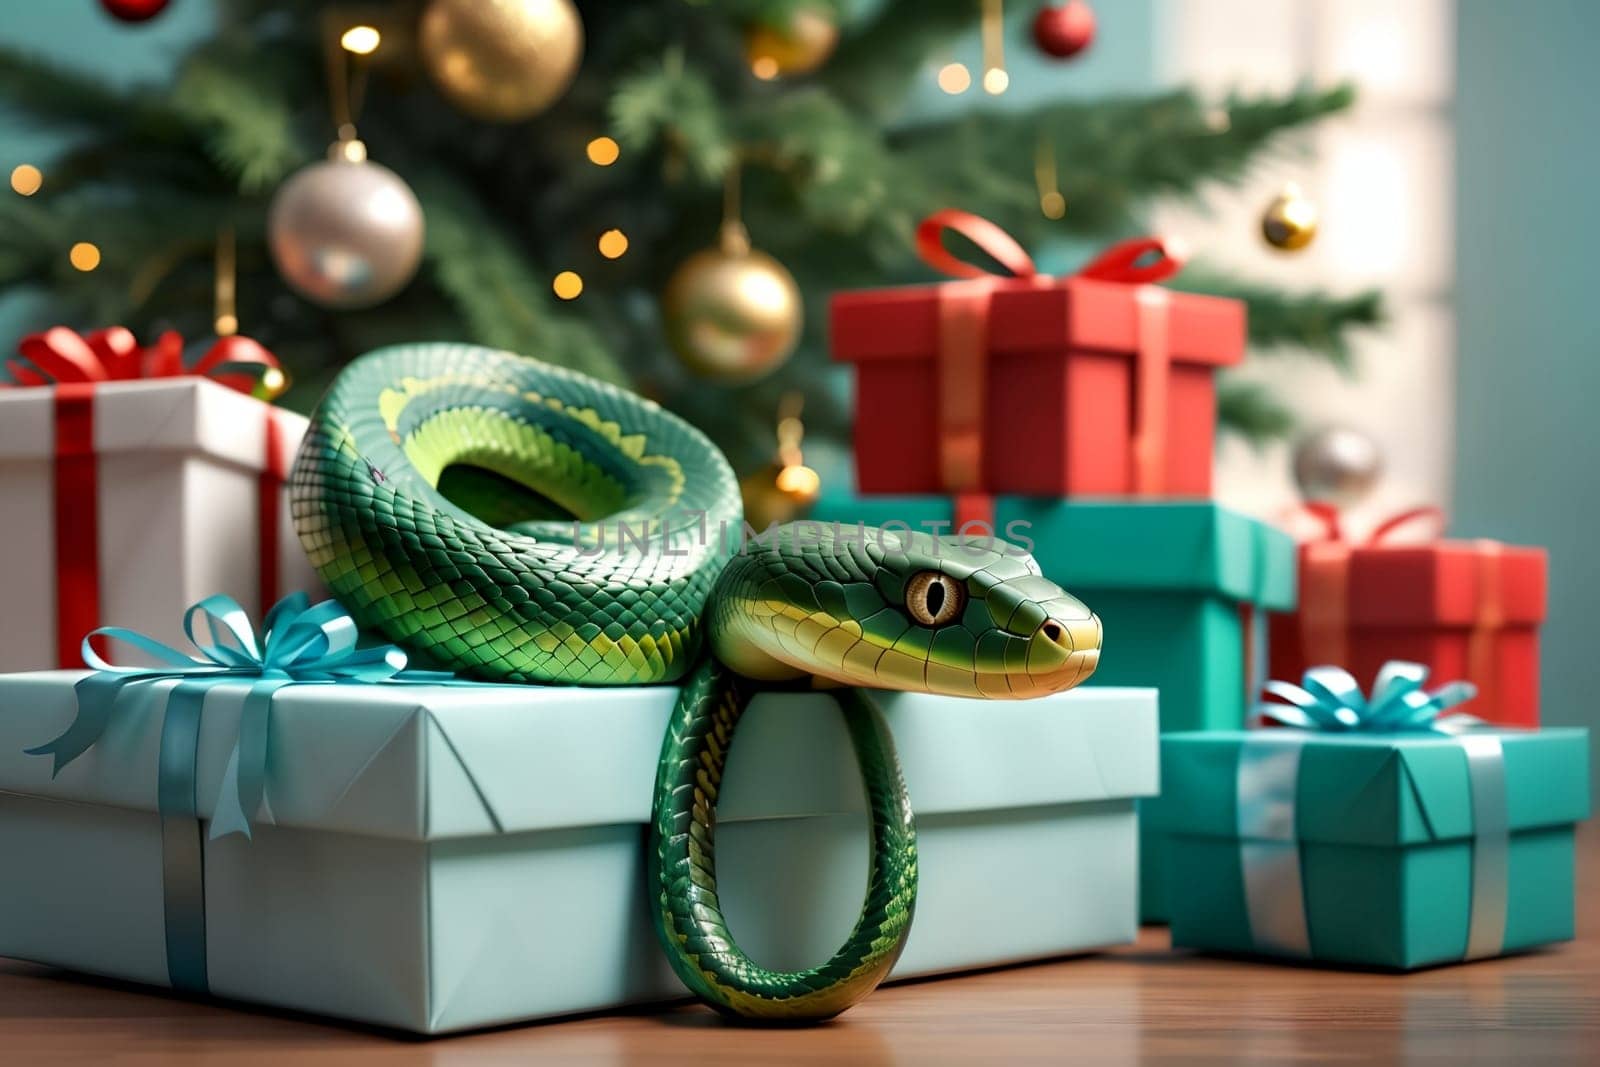 New Year snake with gifts under the Christmas tree, New Year card by Rawlik